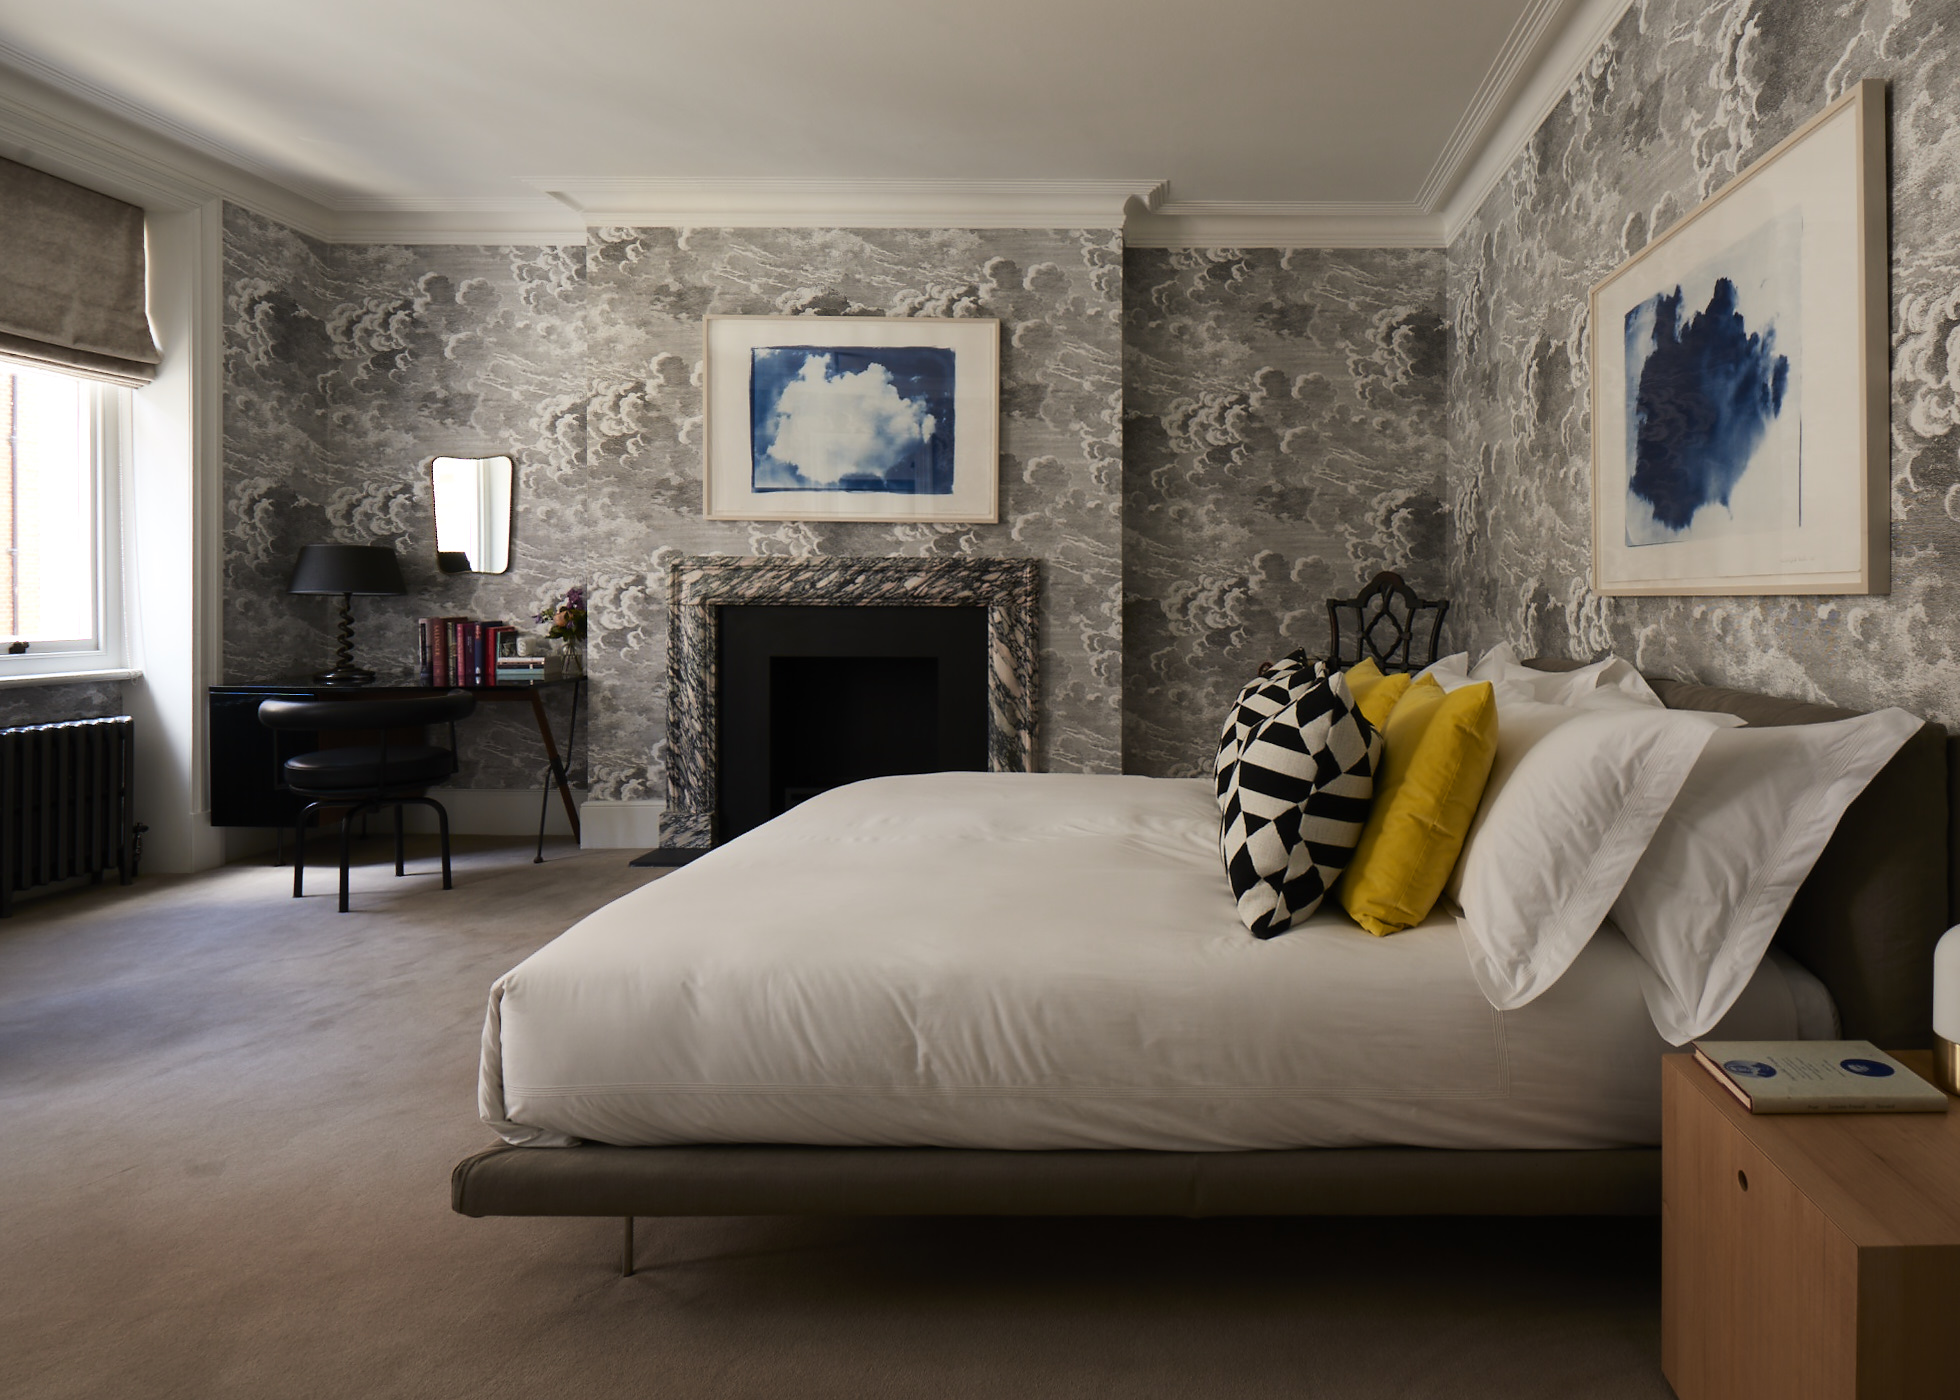 The guest bedroom with clouds wallpaper by Piero Fornasetti. 